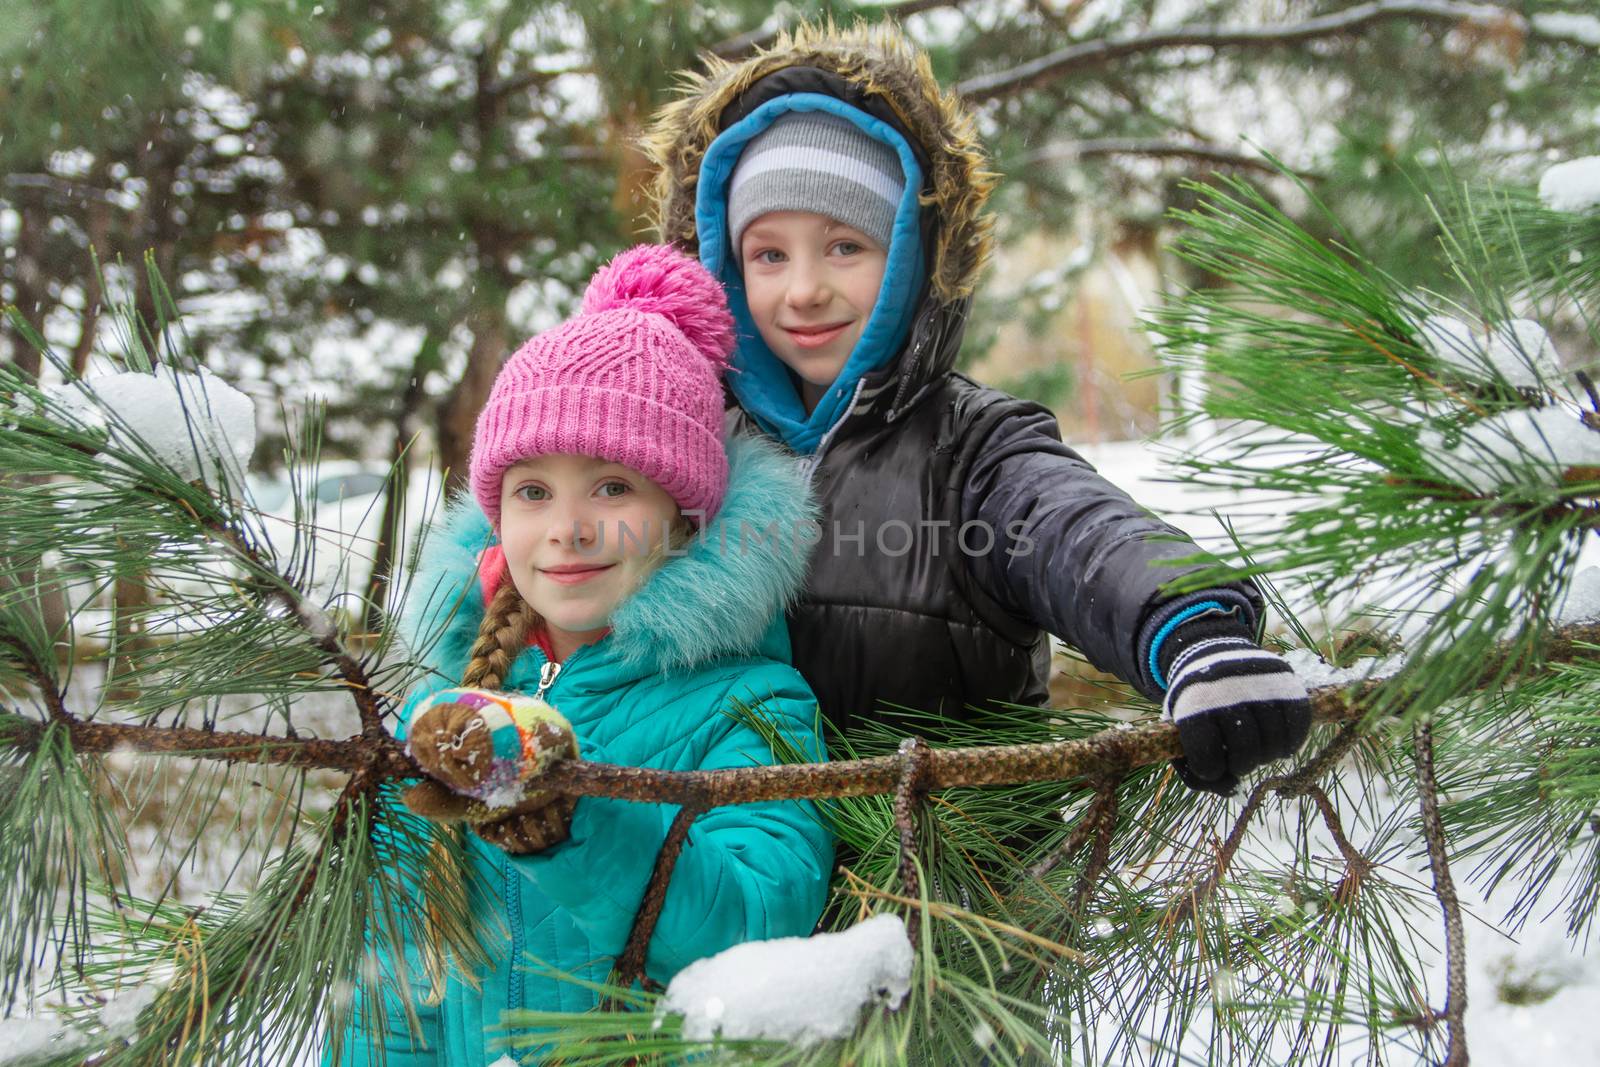 Children looking through snowy pin branches by Angel_a